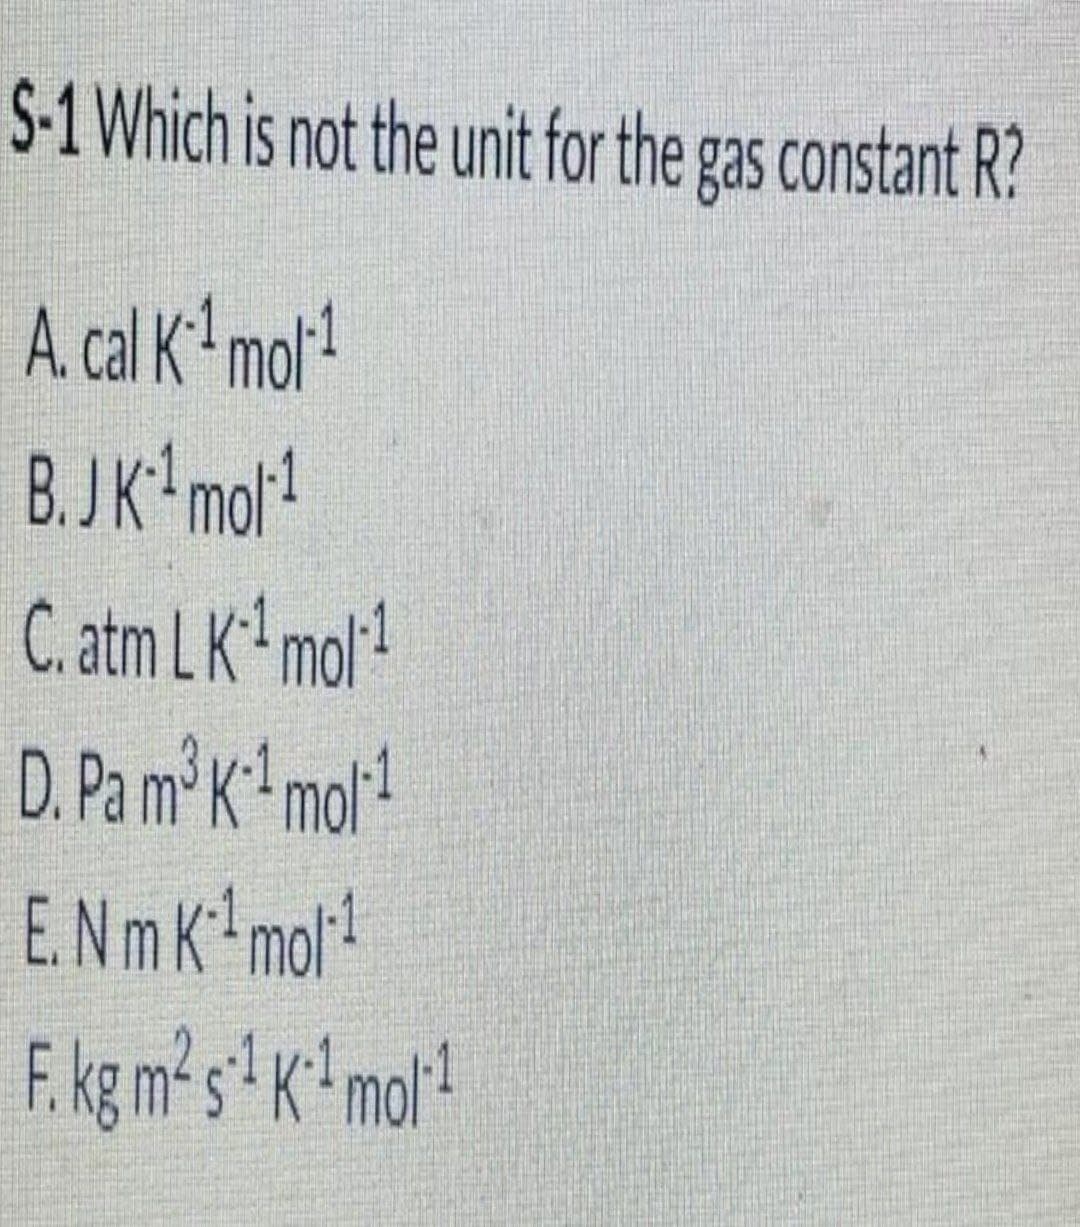 S-1 Which is not the unit for the gas constant R?
A. cal K mol!
B.JK mot!
C. atm LK mol!
D. Pa m²K* mor!
E.Nm K mol!
